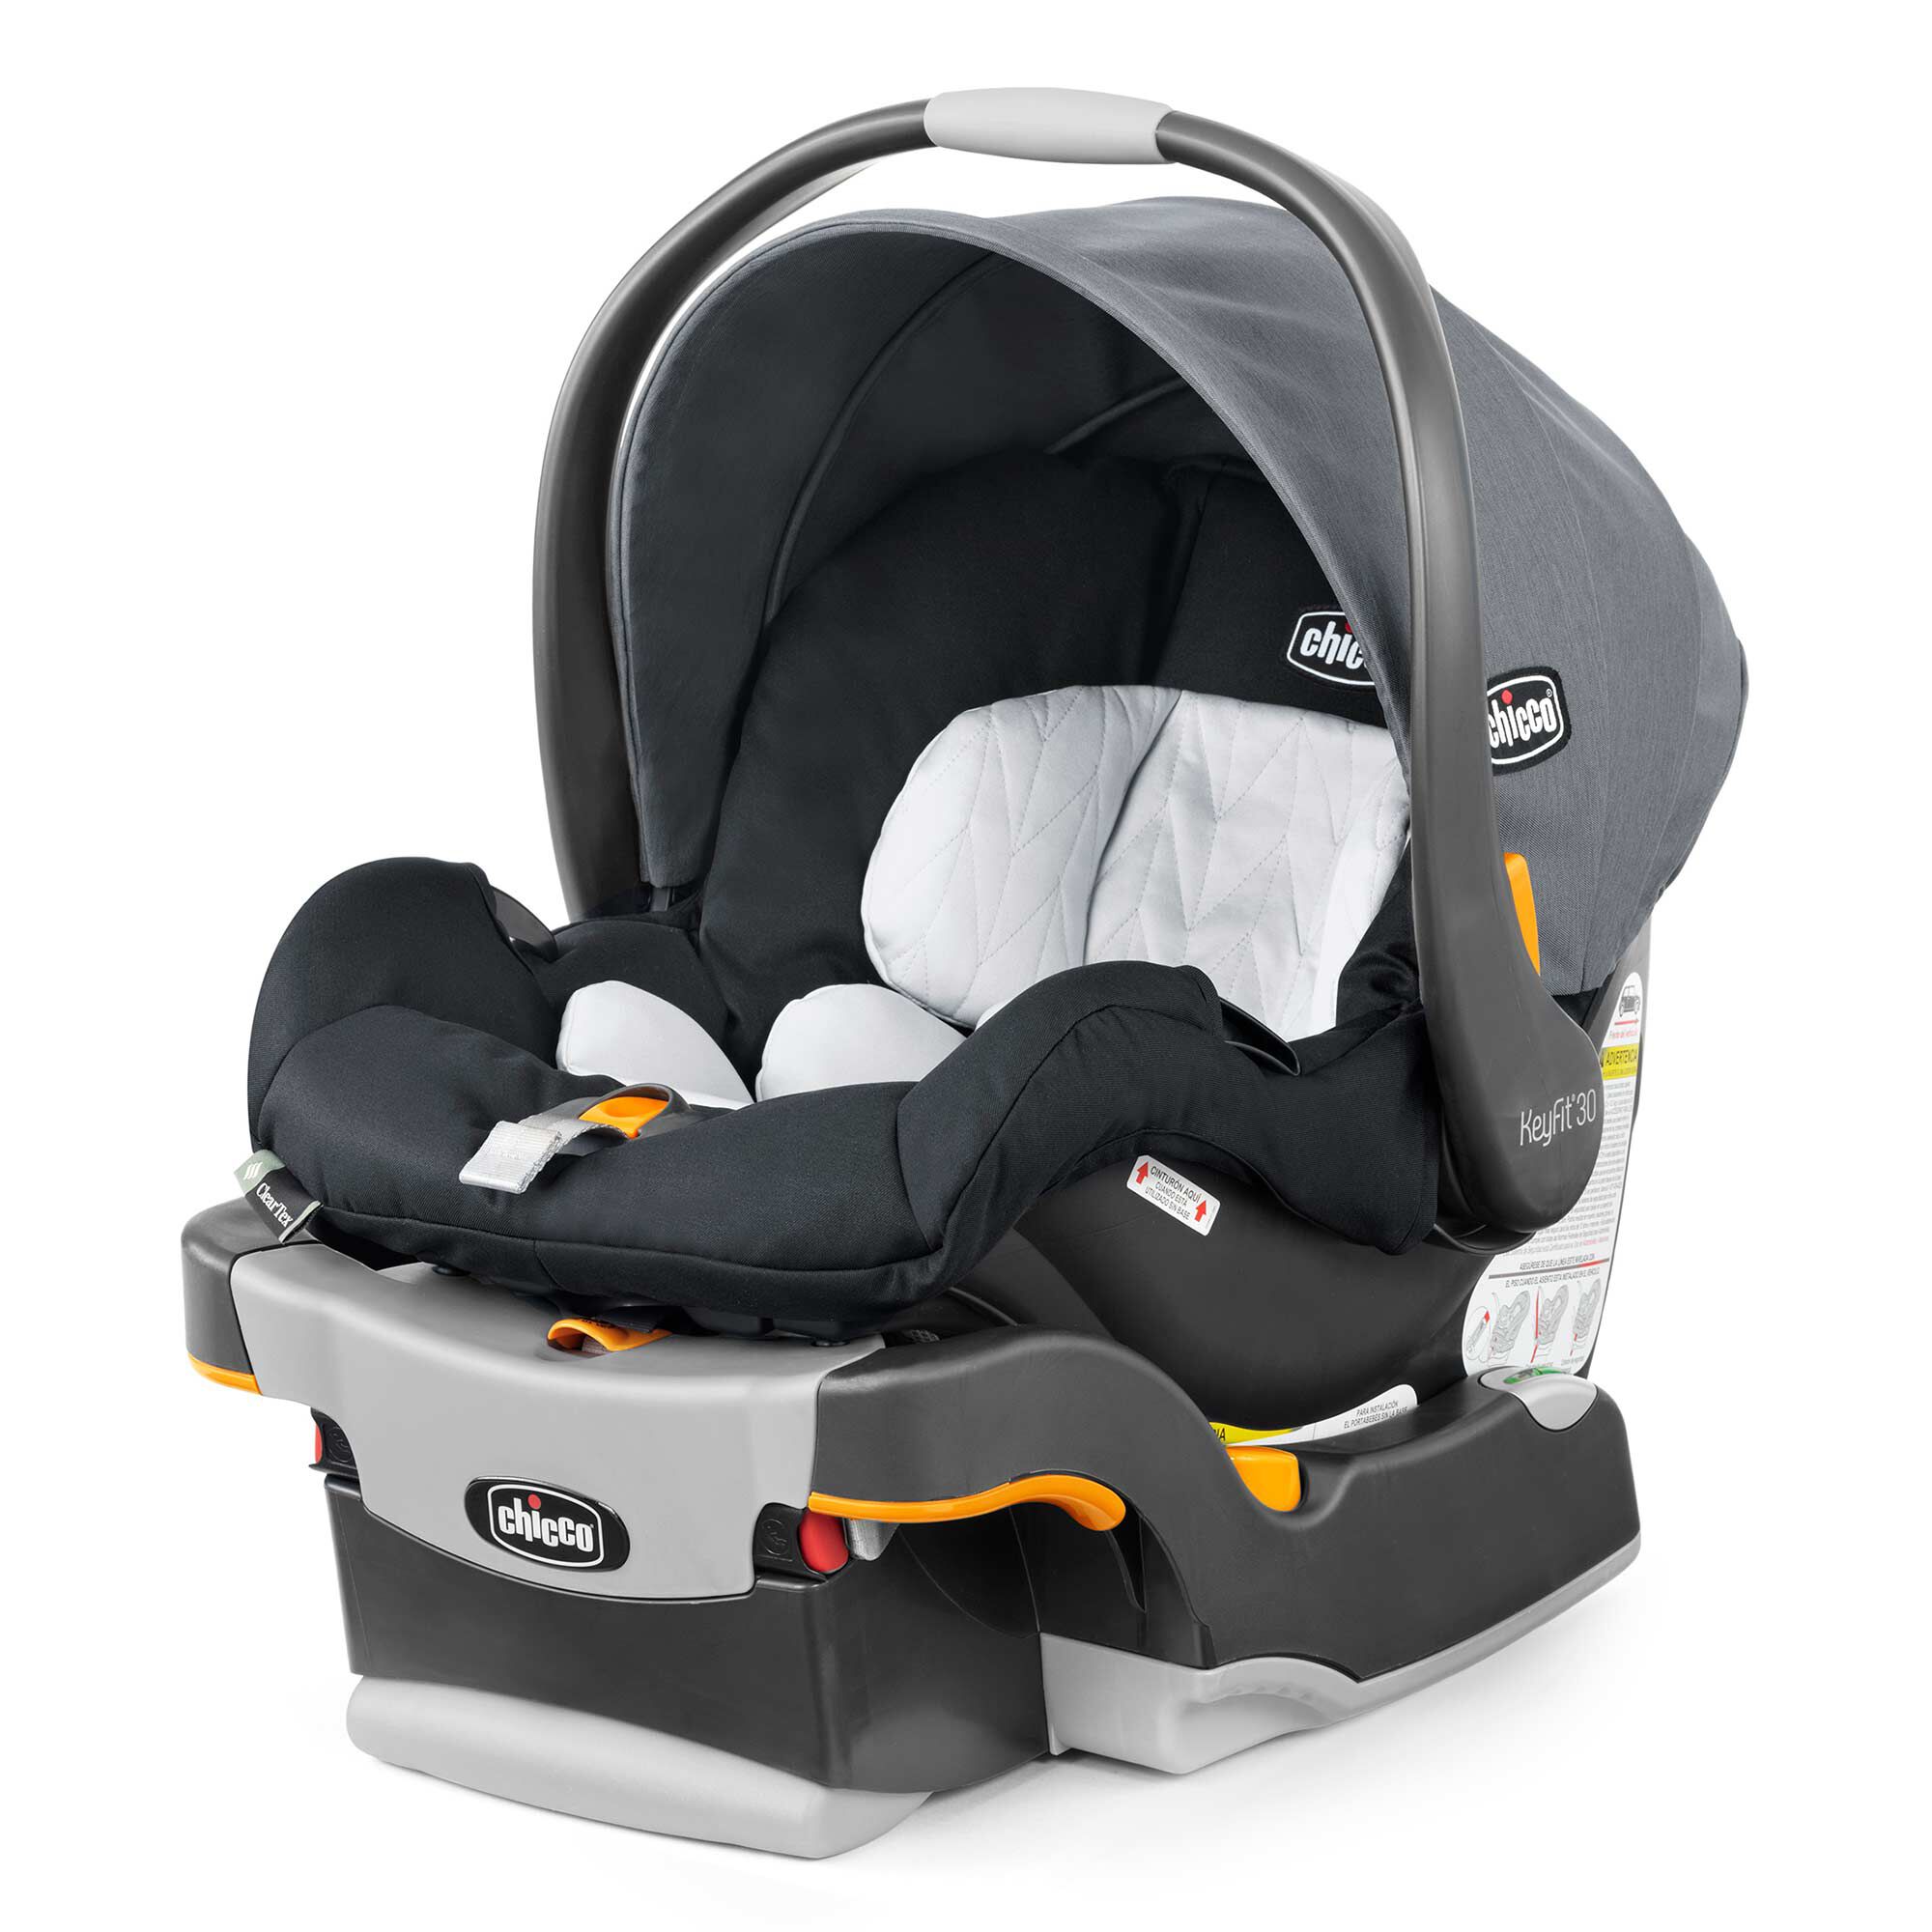 KeyFit 30 ClearTex Infant Car Seat Pewter Chicco